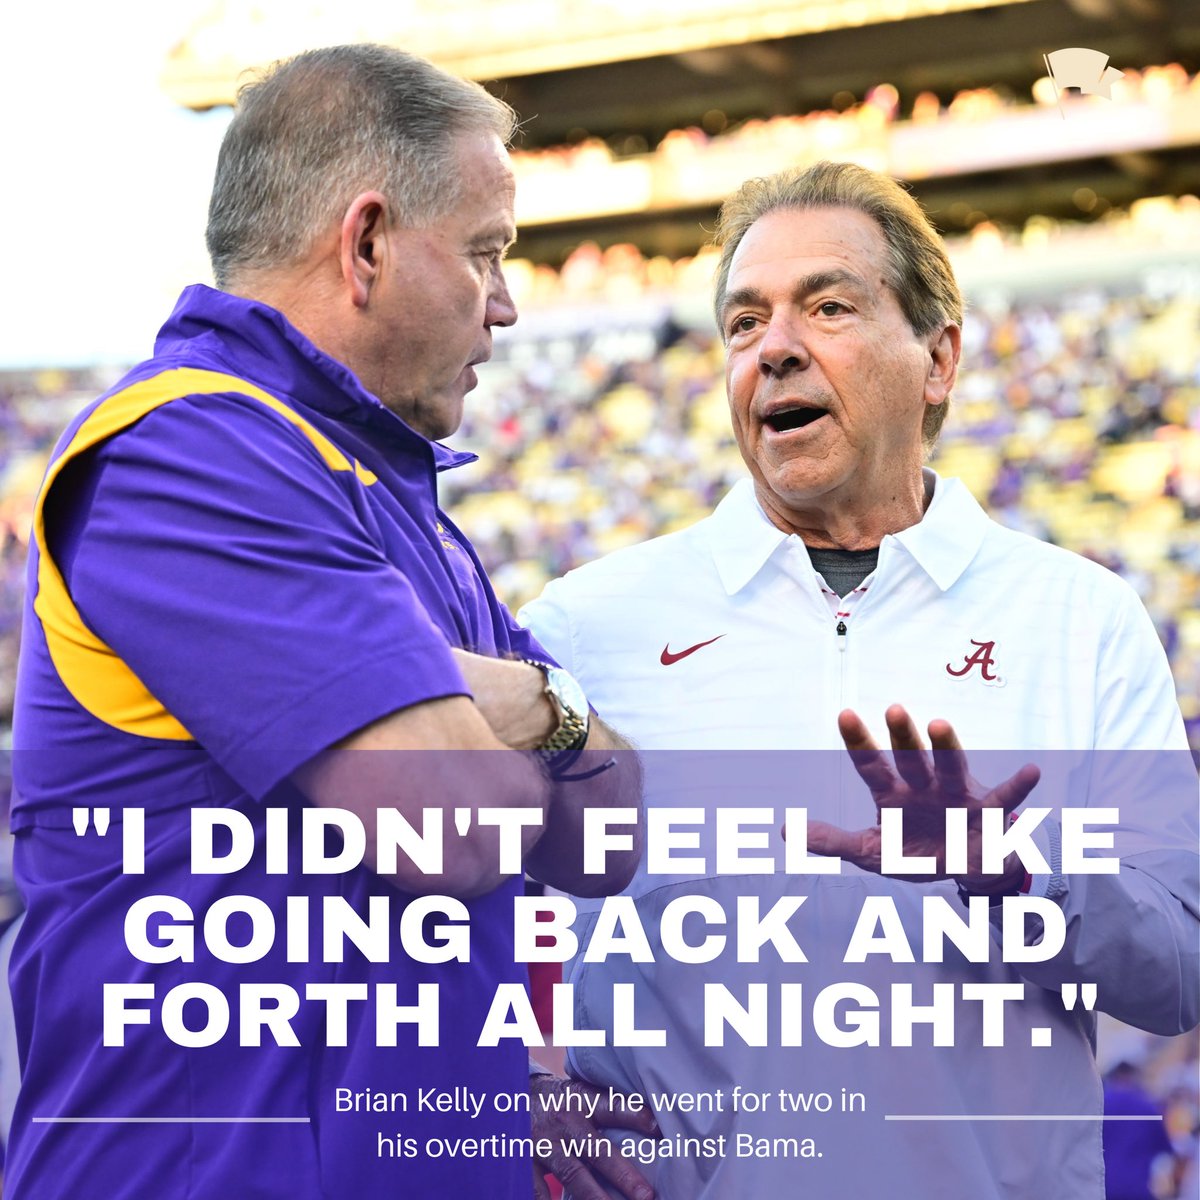 Honestly a legendary quote 😂 #LSU #briankelly #lsufootball #bama